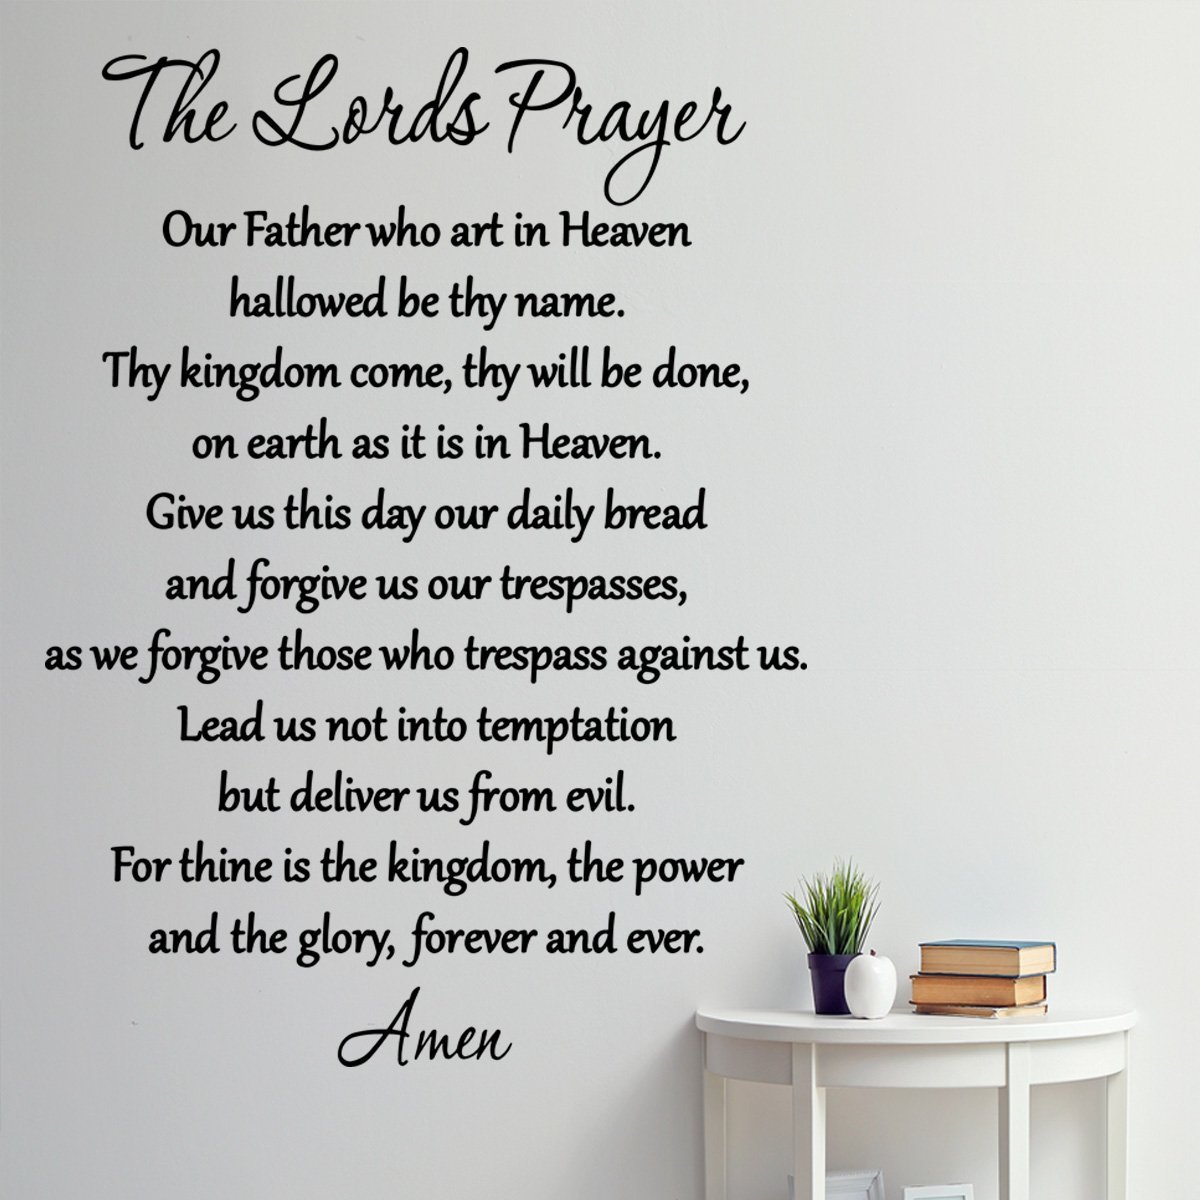 VWAQ The Lord's Prayer Bible Wall Decal Our Father Vinyl Wall Art Scripture Quote Faith Home Christian Decor Stickers - image 1 of 2